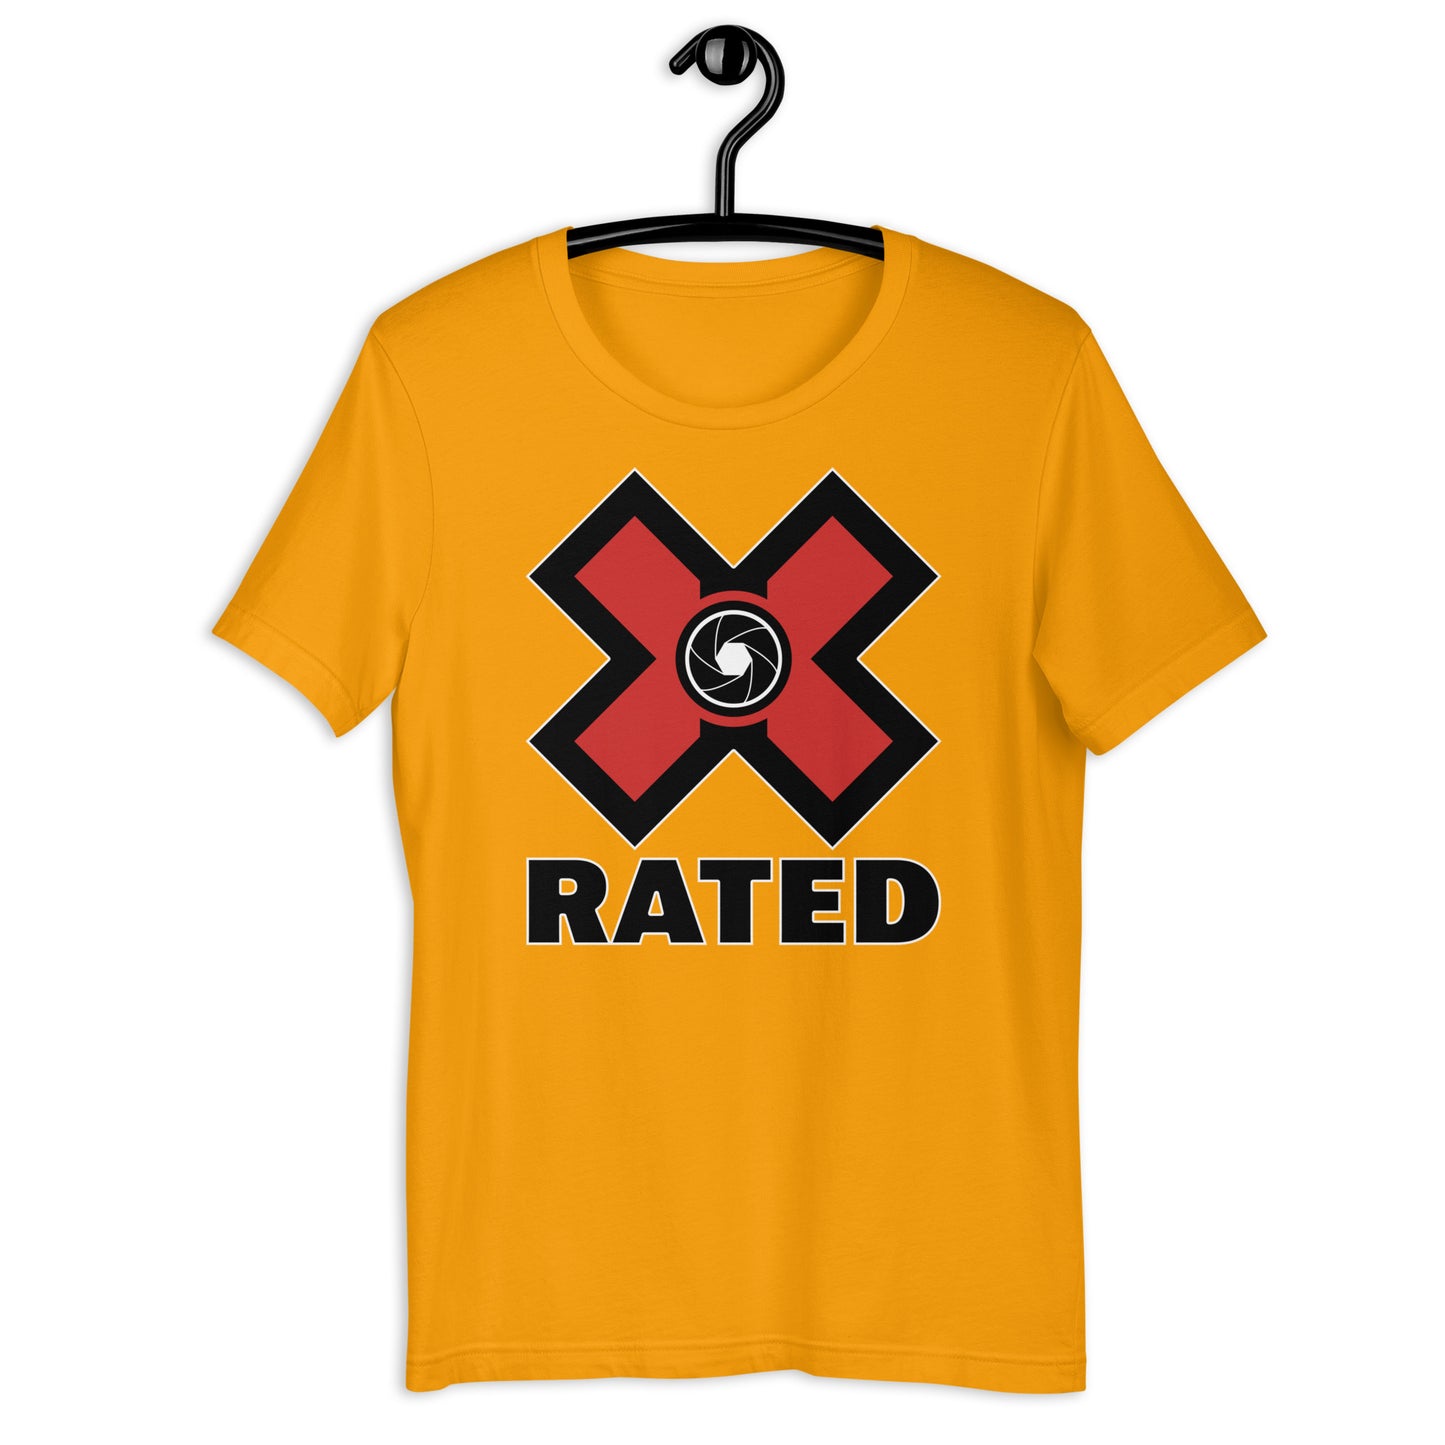 Tainted Goods X-RATED Tee